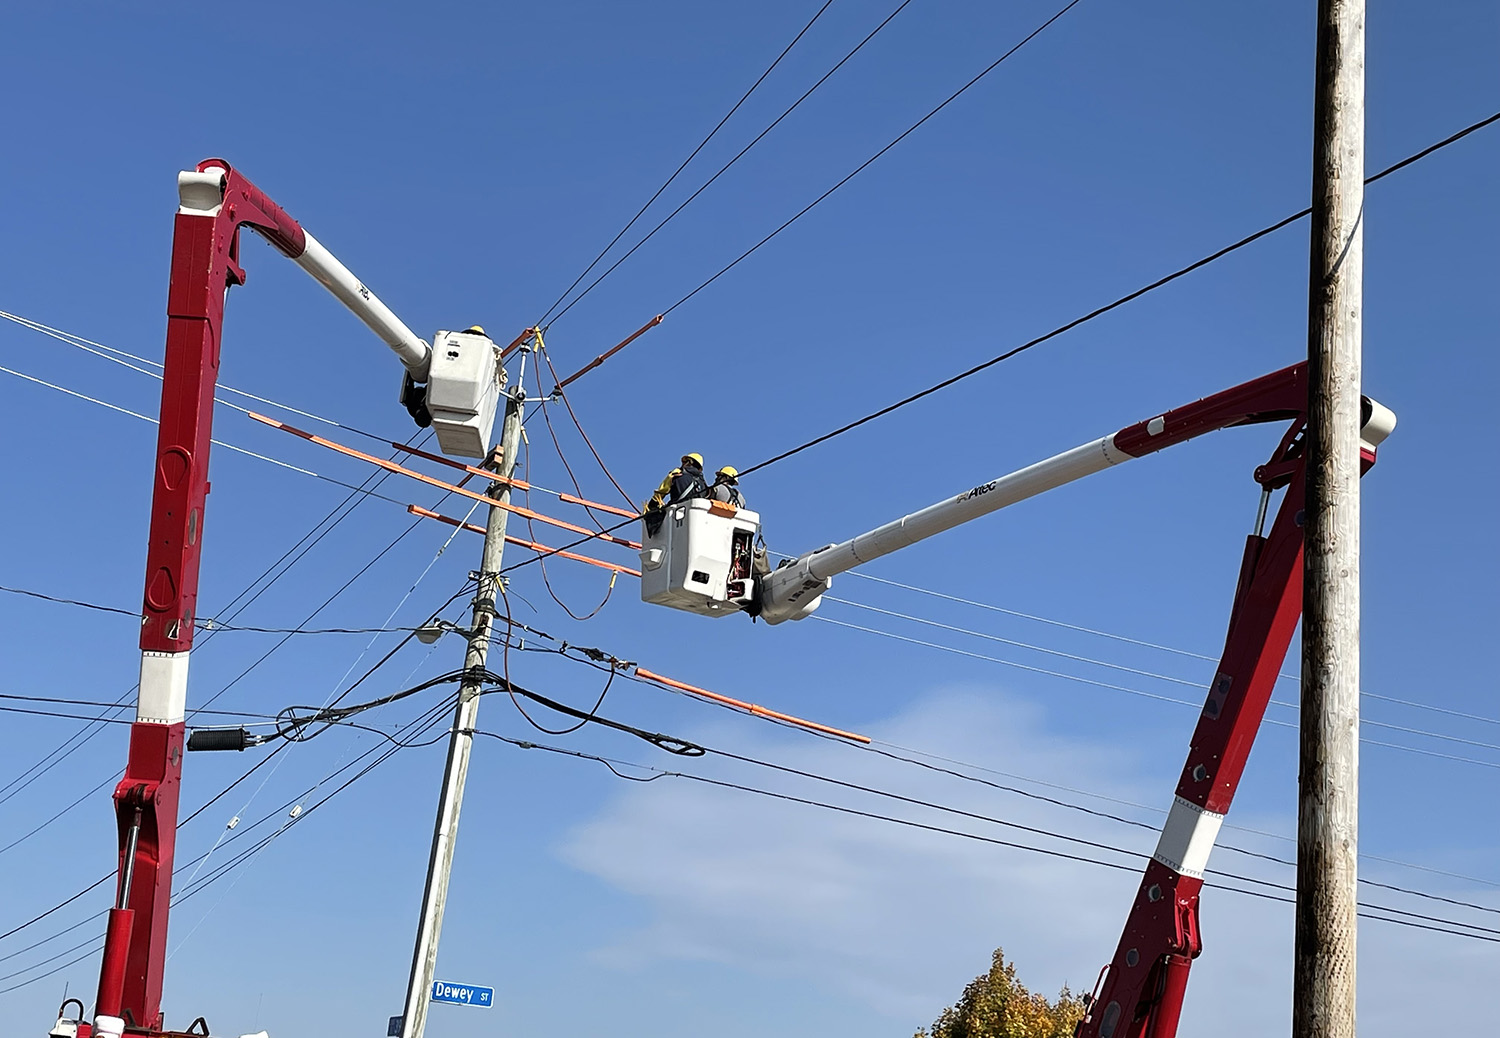 Electric workers in cherry pickers working on power lines